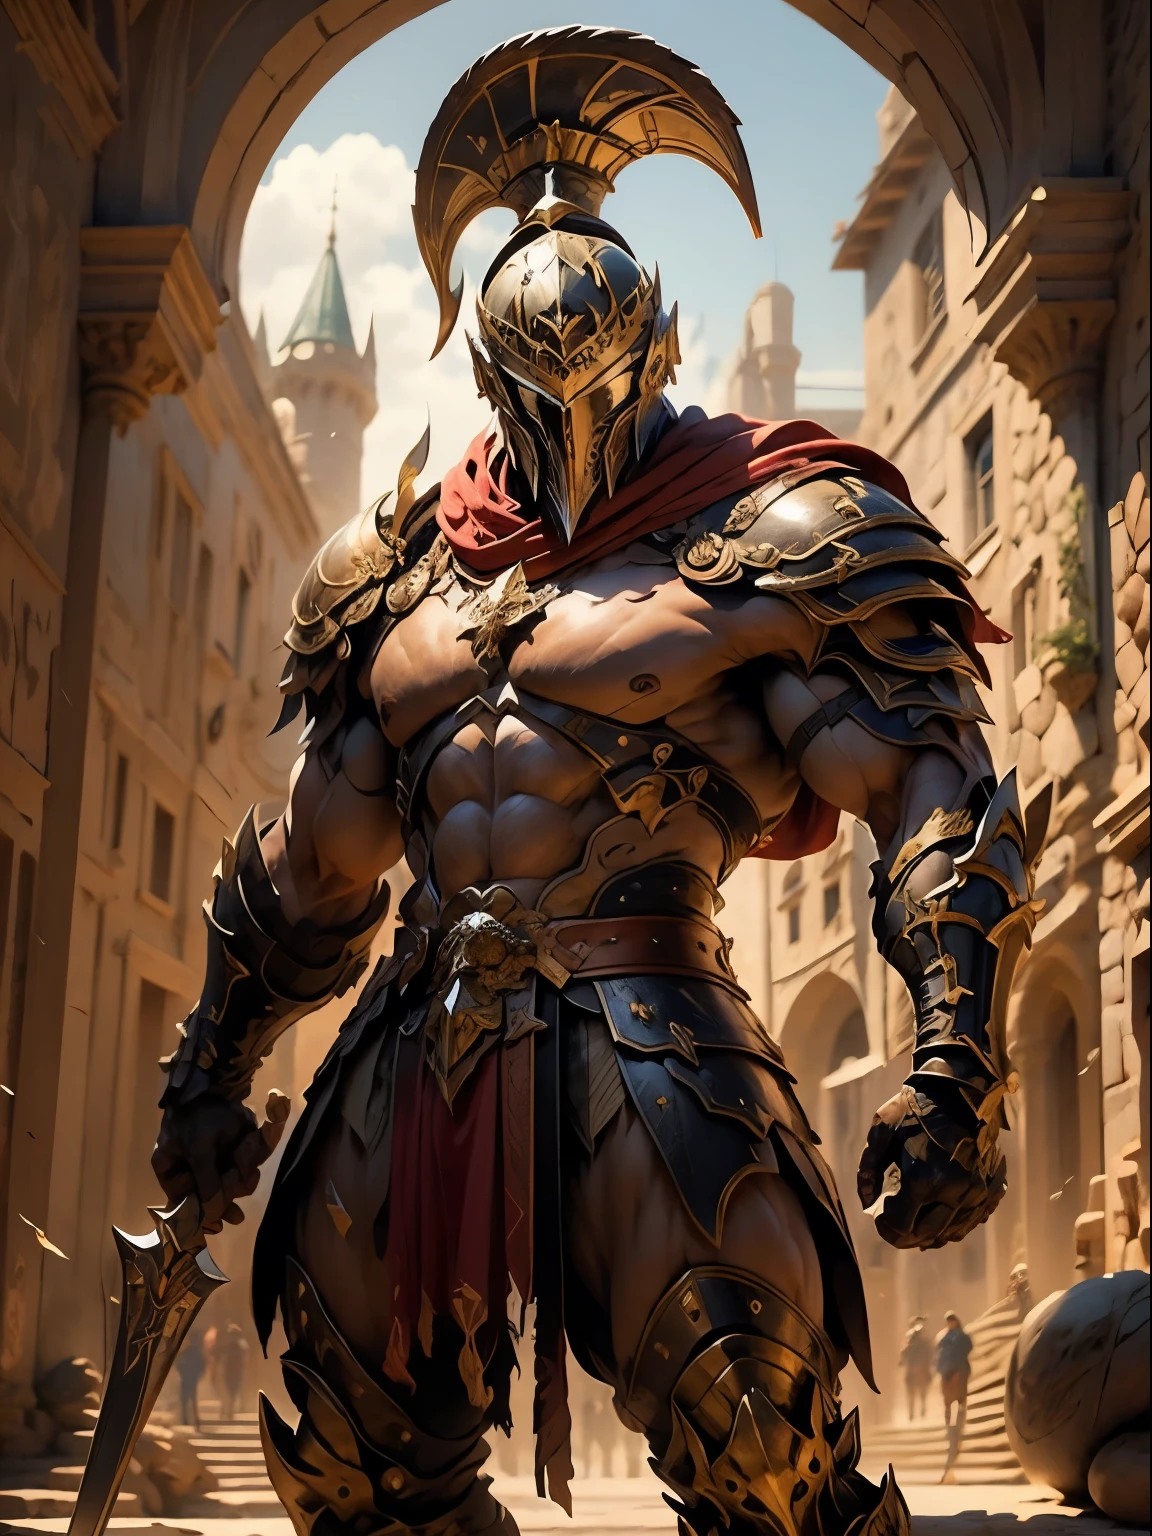 beautiful warrior in golden greek armor, Jet black hair, hoplite helmet, muscular, huge and heavy breasts, I look at the viewer, foreground, model photo poses, work of art, best qualityer, 8k, nblurry background, medieval fantasy castle in the background